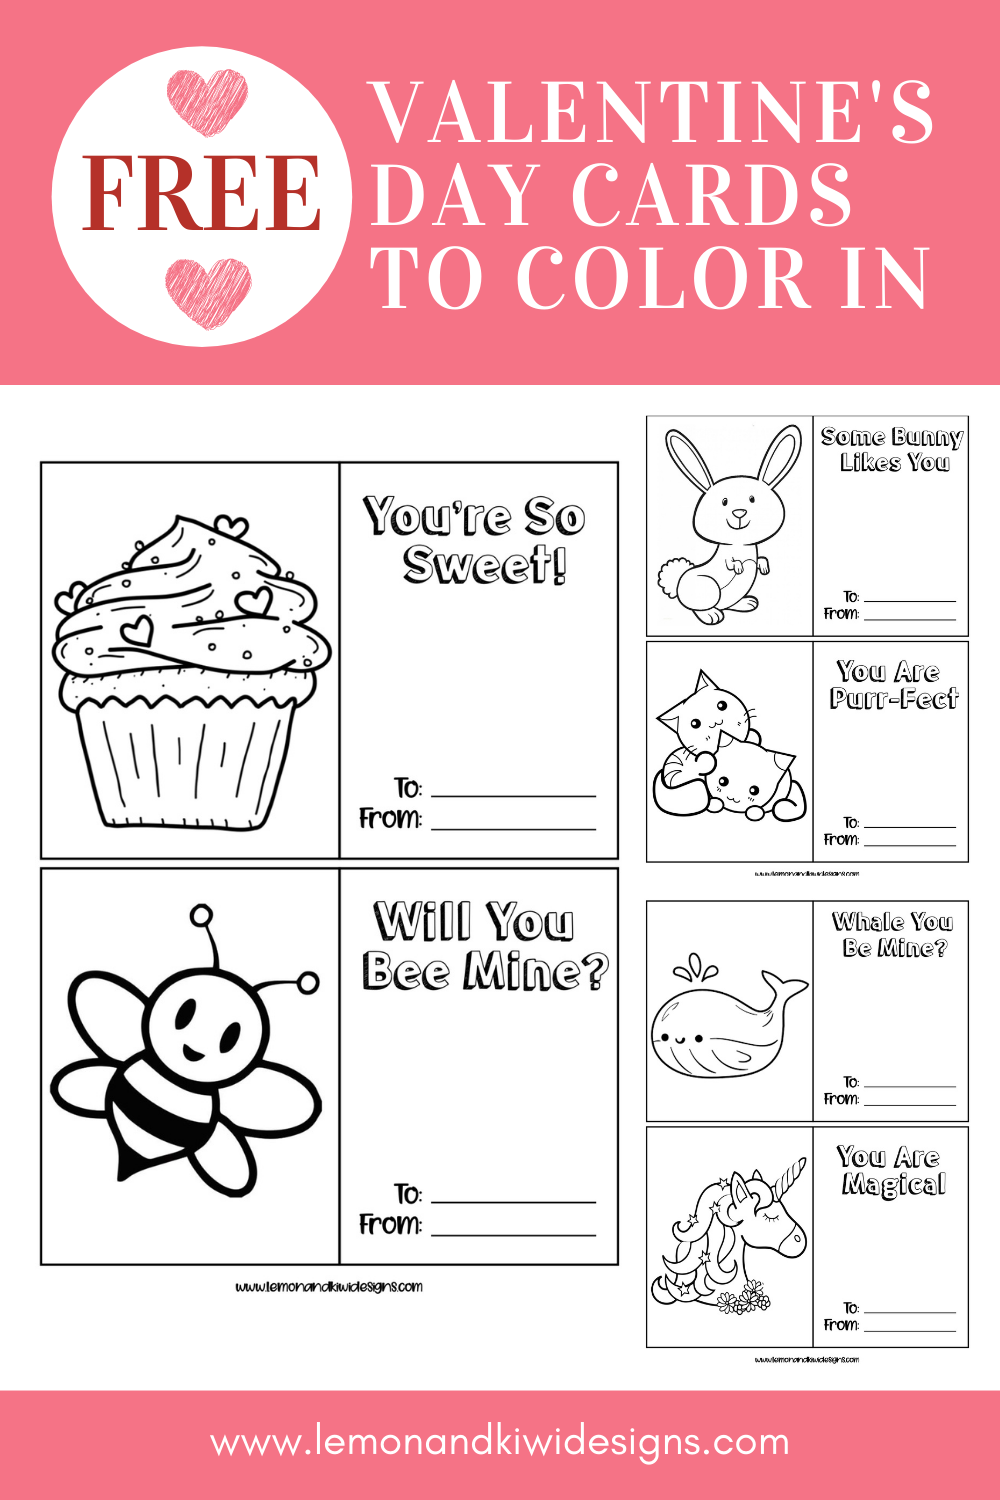 Free valentines day cards to color in printable valentines coloring pages